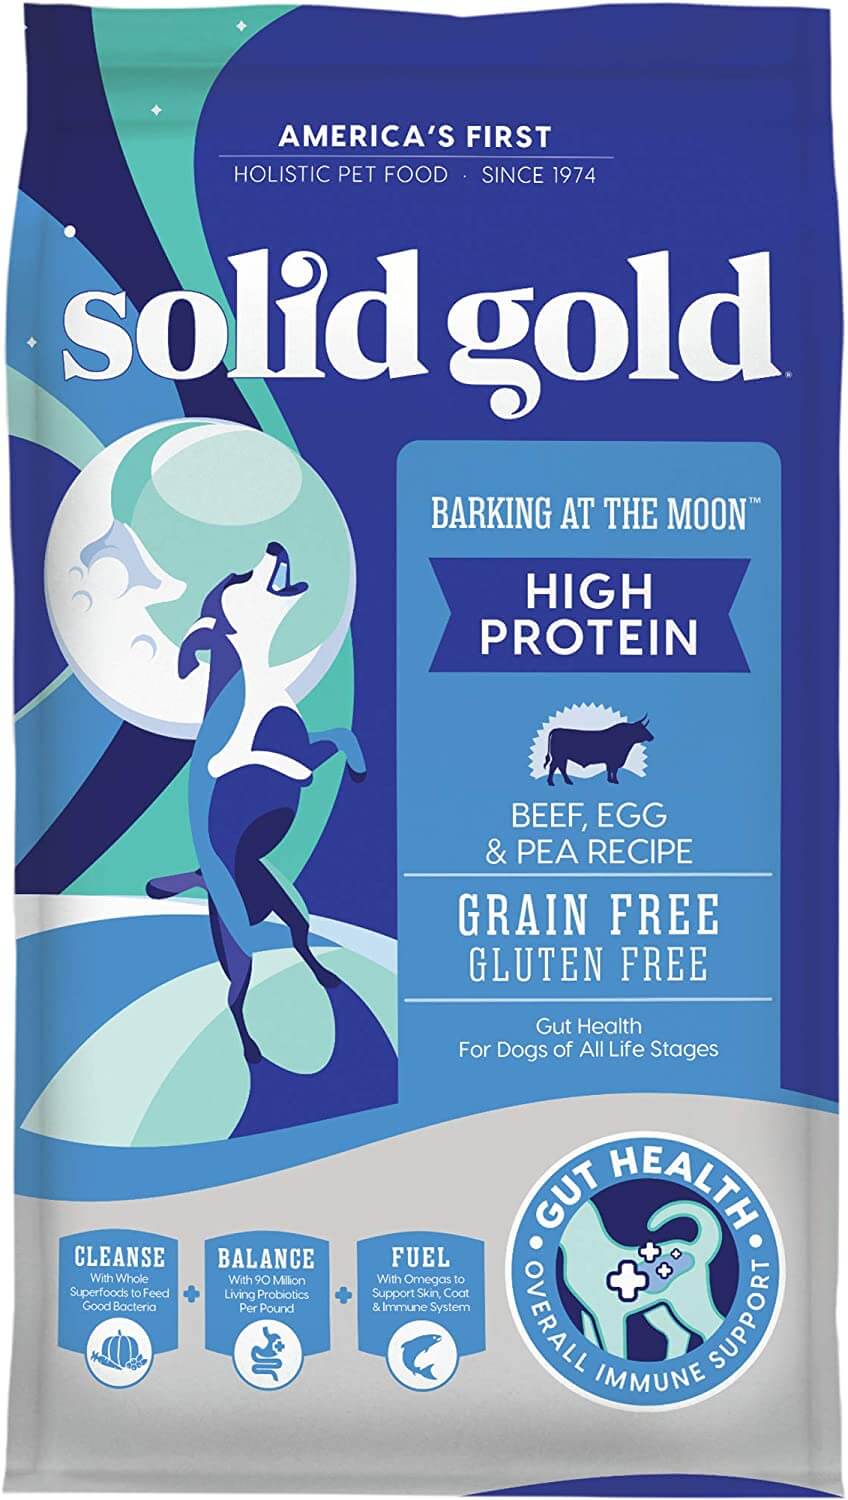 Solid Gold Barking at The Moon Dry Dog Food for All Life Stages